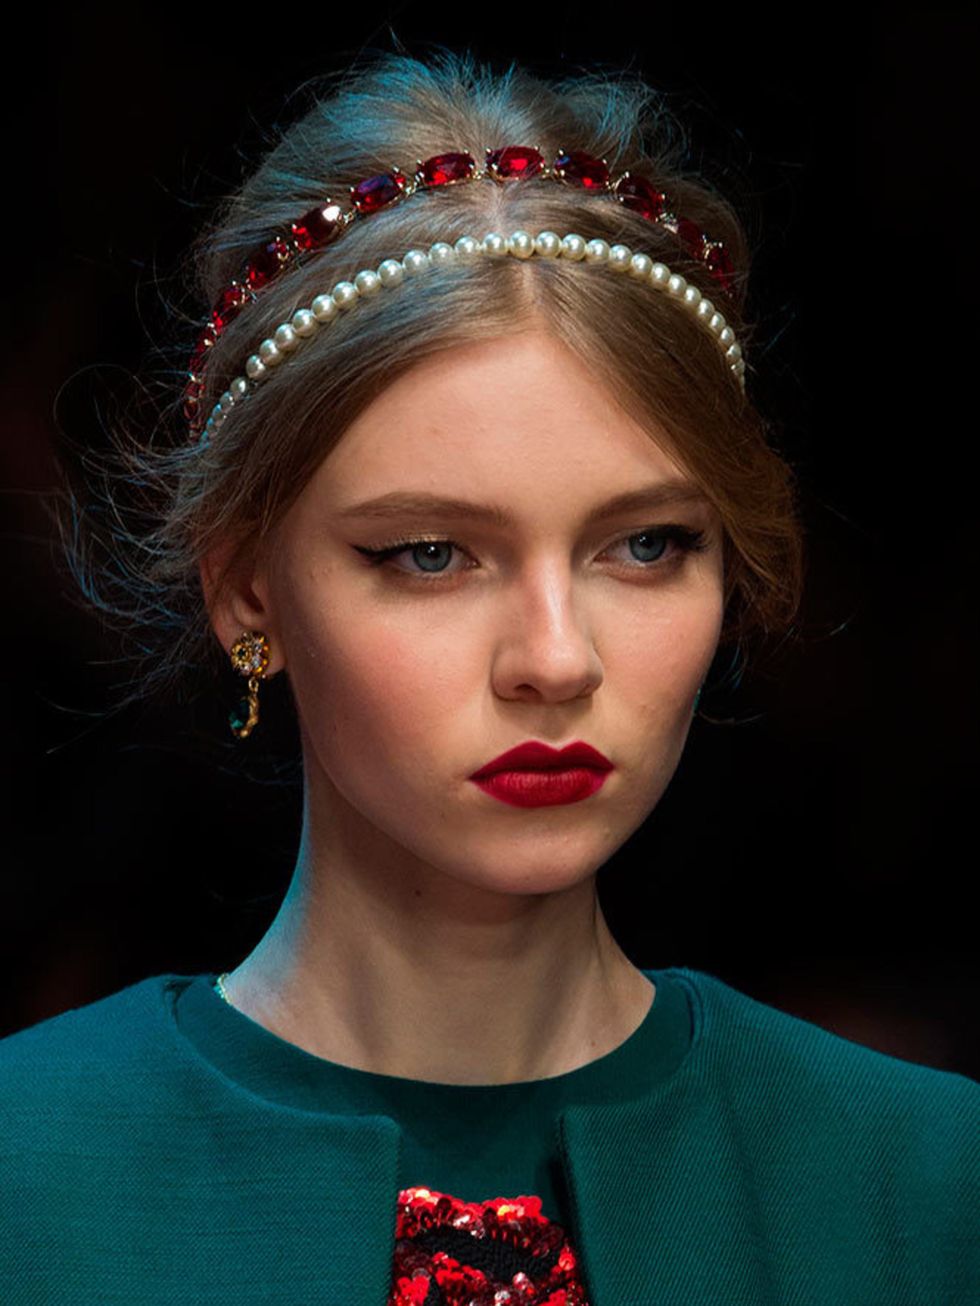 <p><a href="http://www.elleuk.com/catwalk/dolce-gabbana/autumn-winter-2015"><strong>Dolce &amp; Gabbana</strong></a></p>

<p>The look: Glam mama</p>

<p>Hair stylist: <a href="http://www.elleuk.com/beauty/the-beauty-experts-you-need-to-know-charlotte-tilb